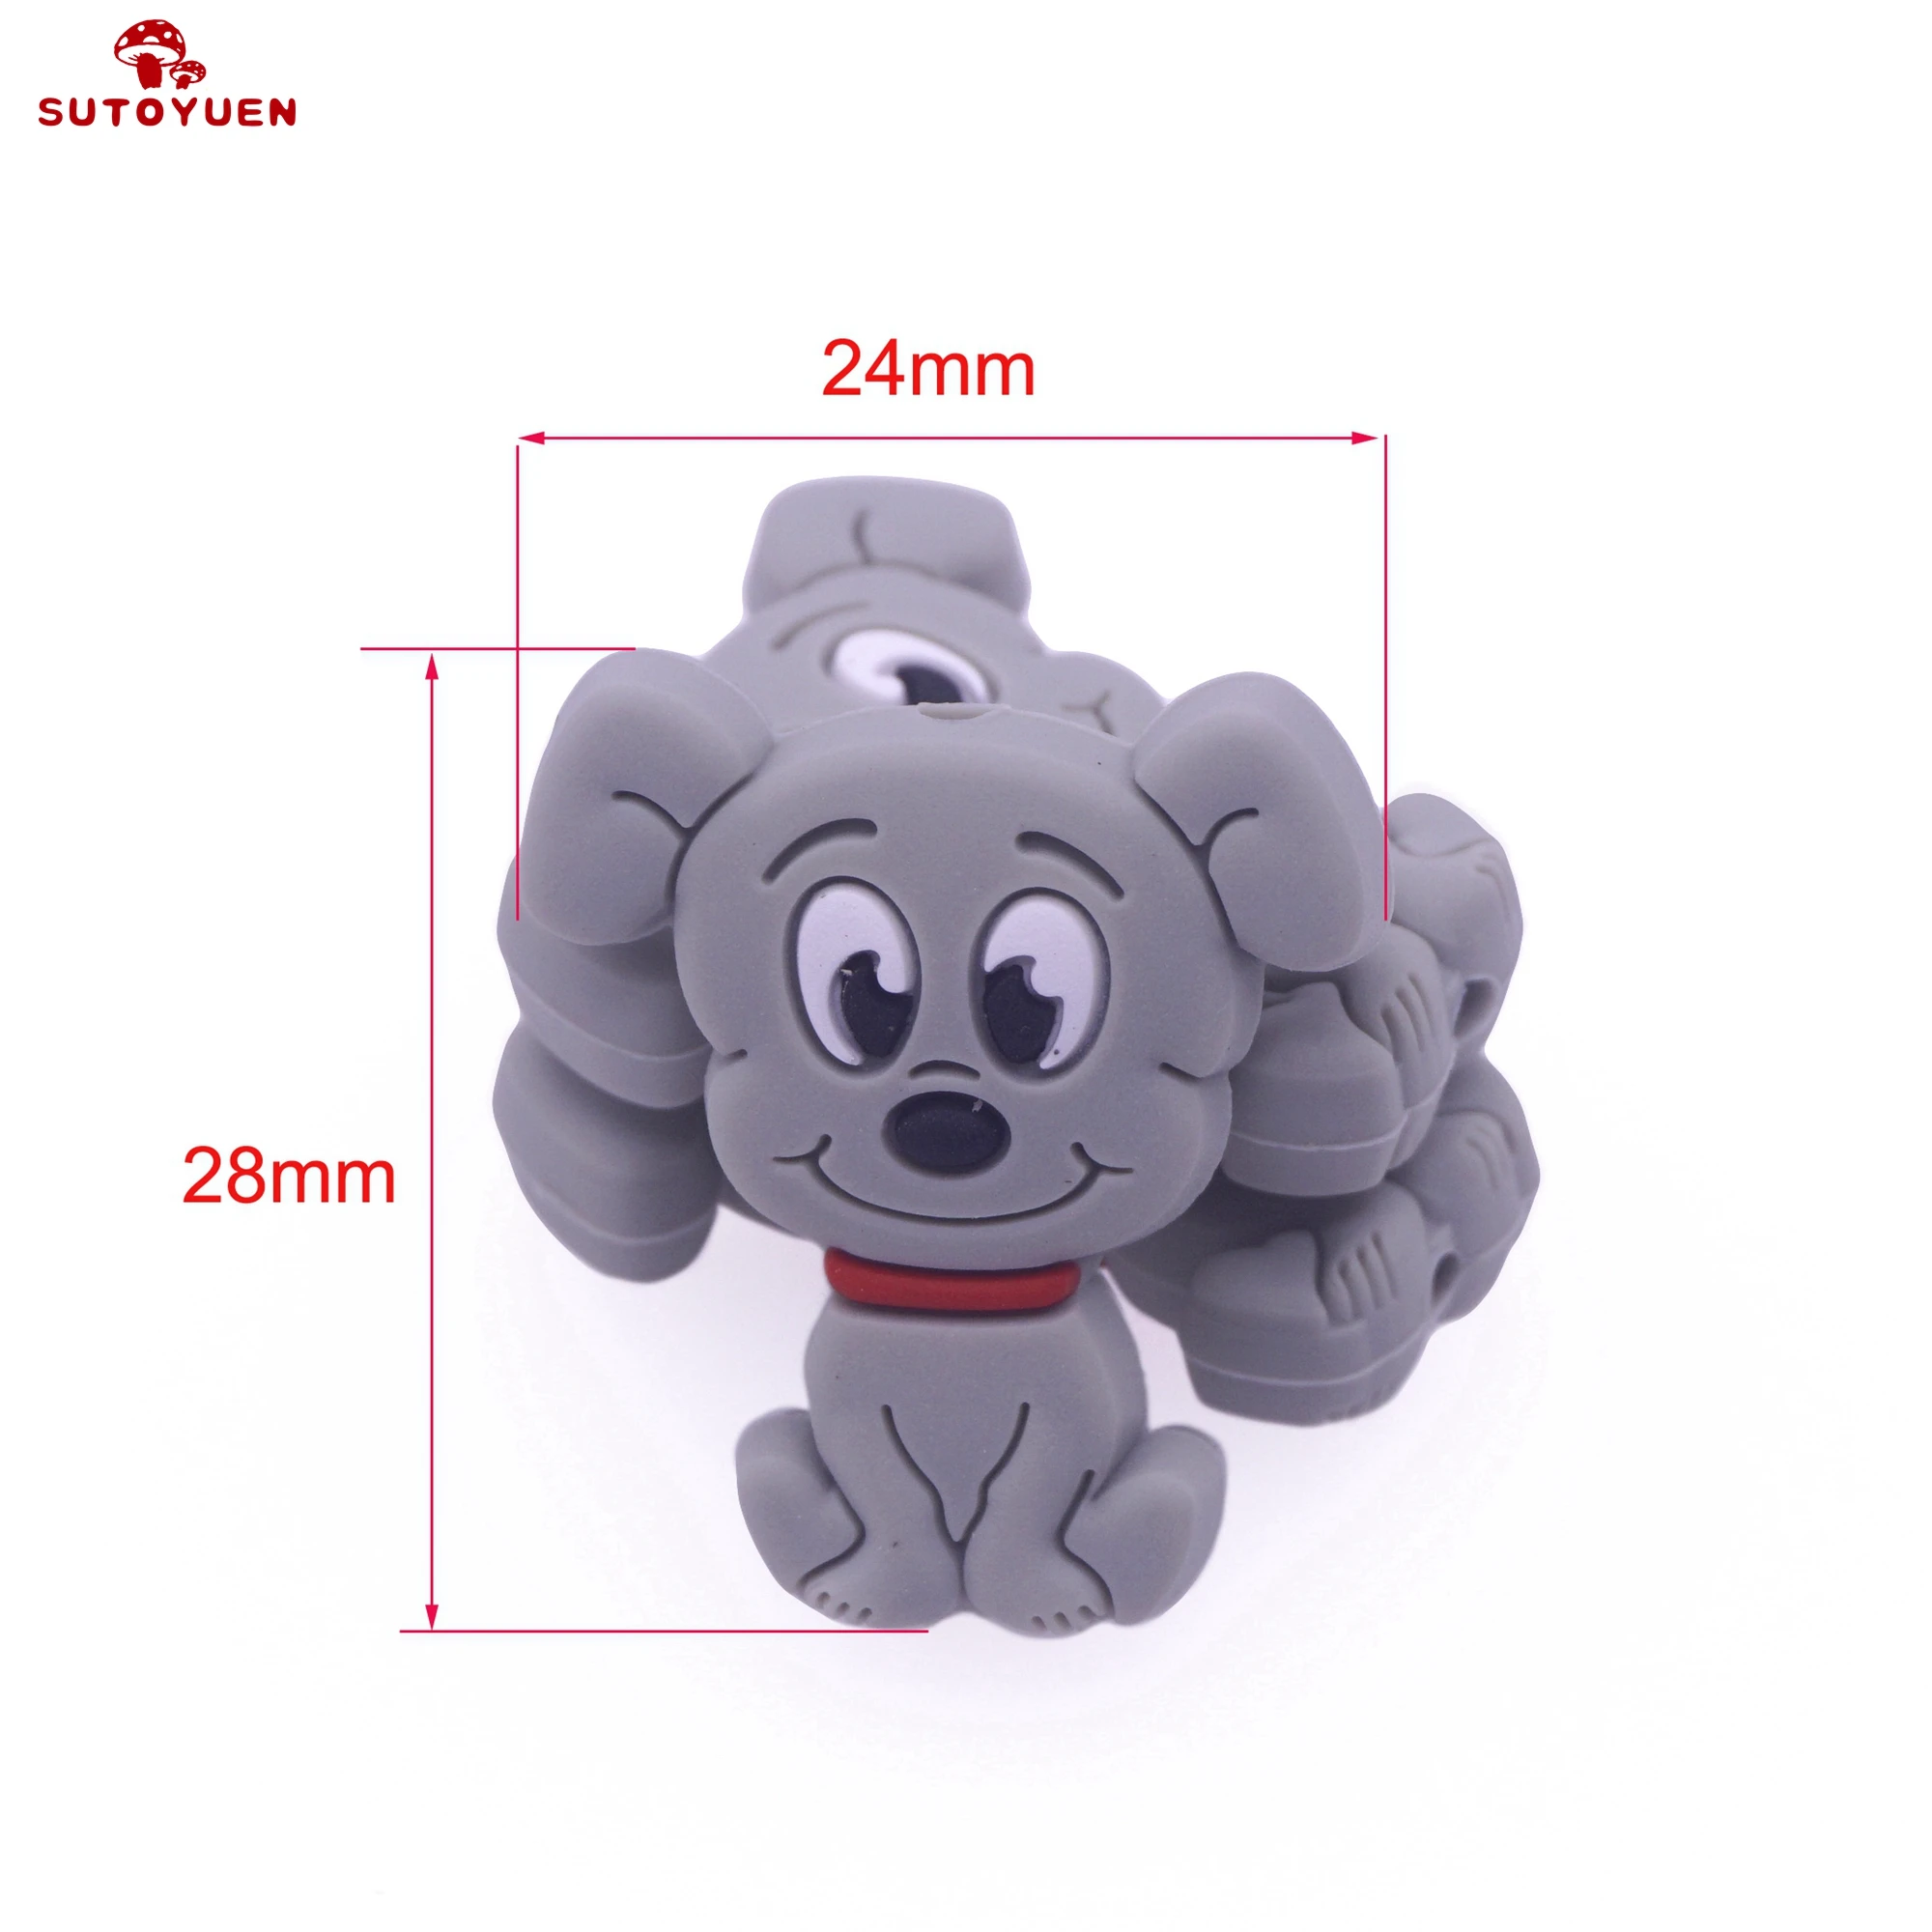 Sutoyuen 5pc Food Grade Cartoon Silicone Beads Mini Puppy Dog Baby Teether Bead BPA Free Chewing DIY Pacifier Baby Teething Toys images - 6